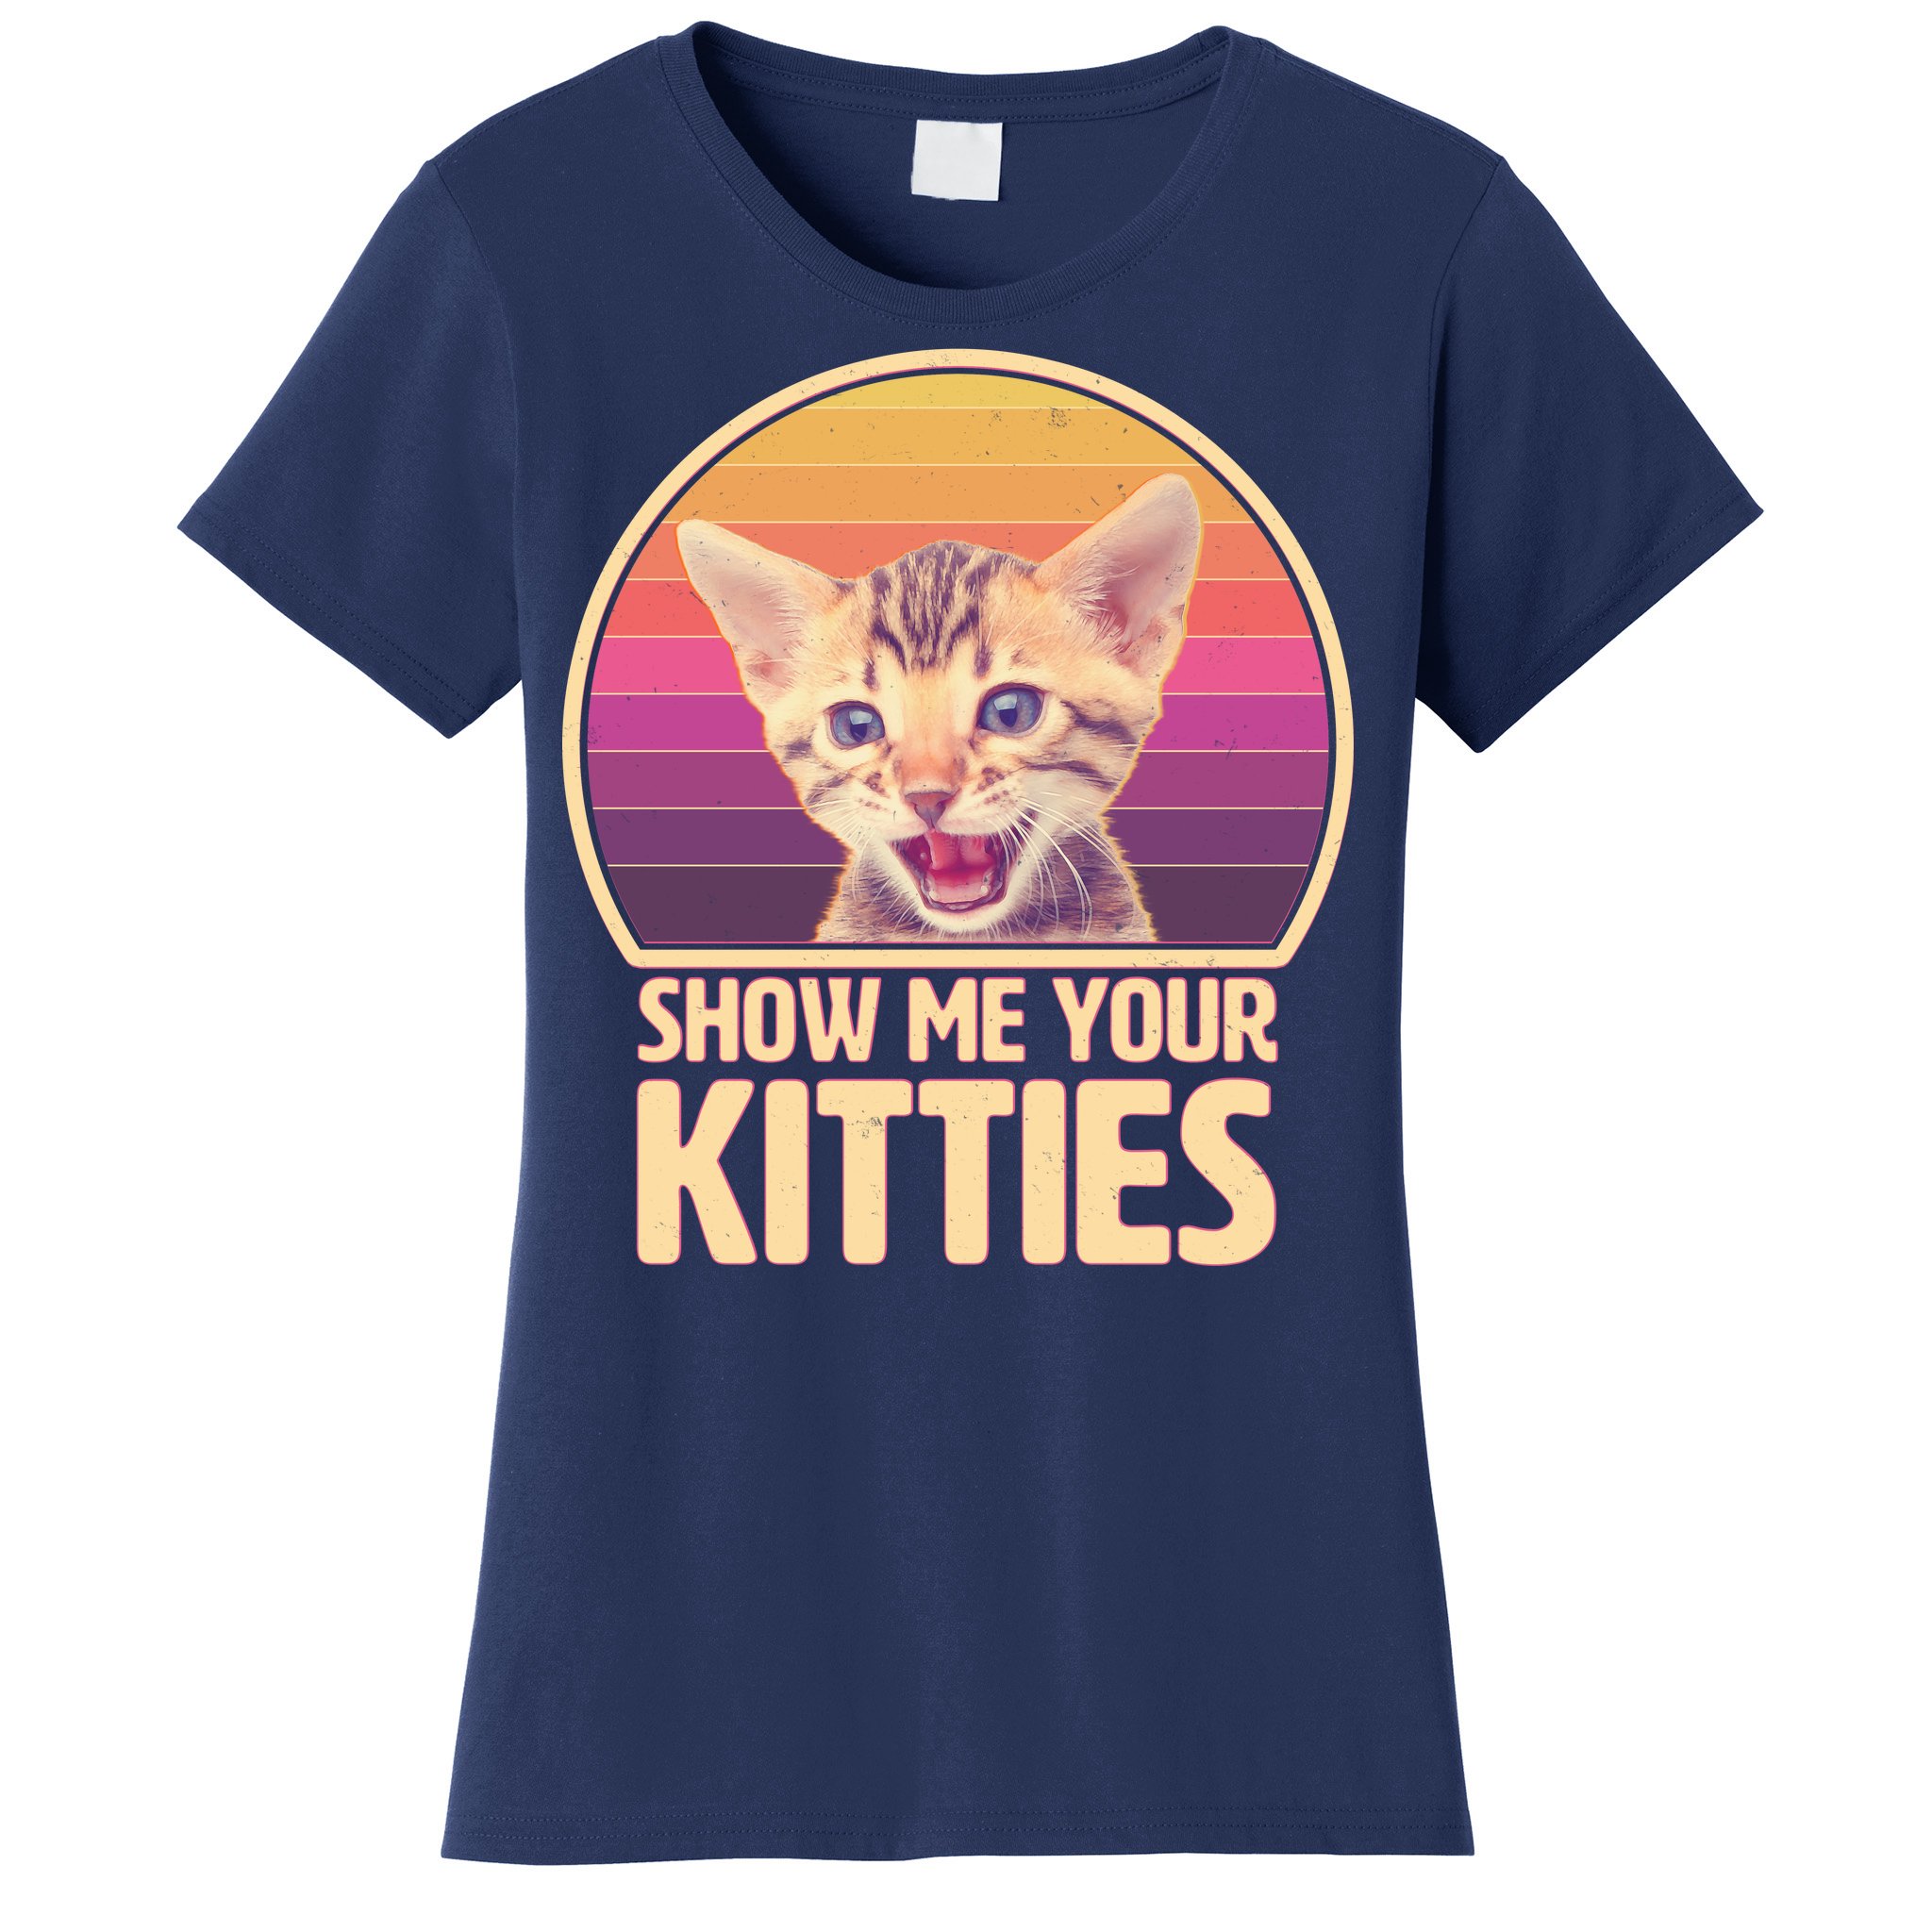 Show Me Your Kitties Funny Adult Sarcastic T-Shirt